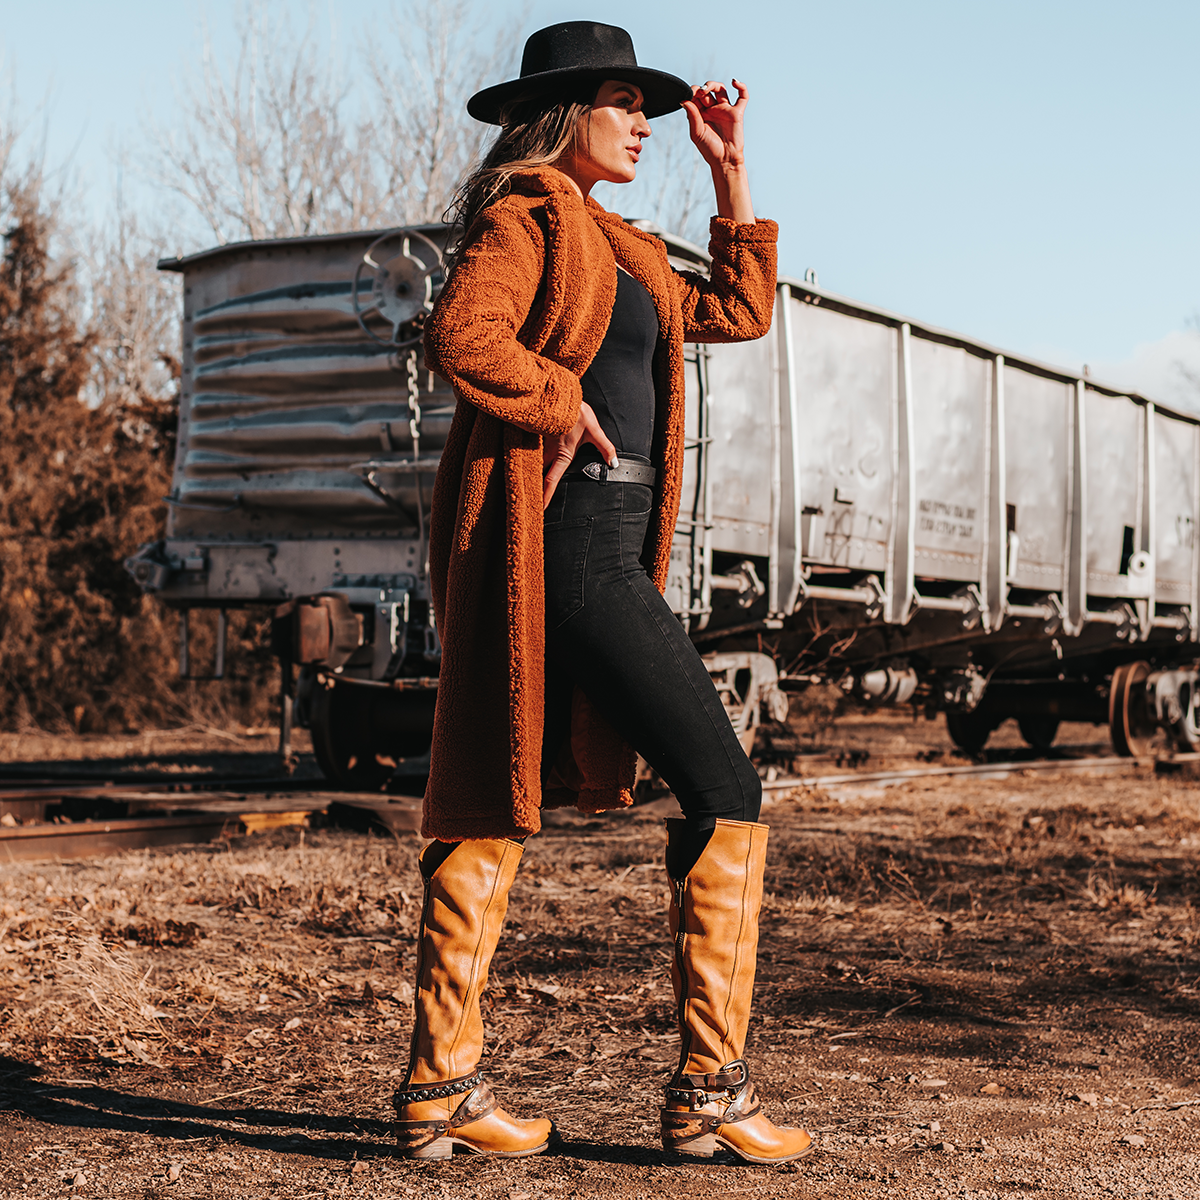 FREEBIRD women's Rodondo wheat boot featuring a a relaxed silhouette, low heel, and mixed metal buckles lifestyle image